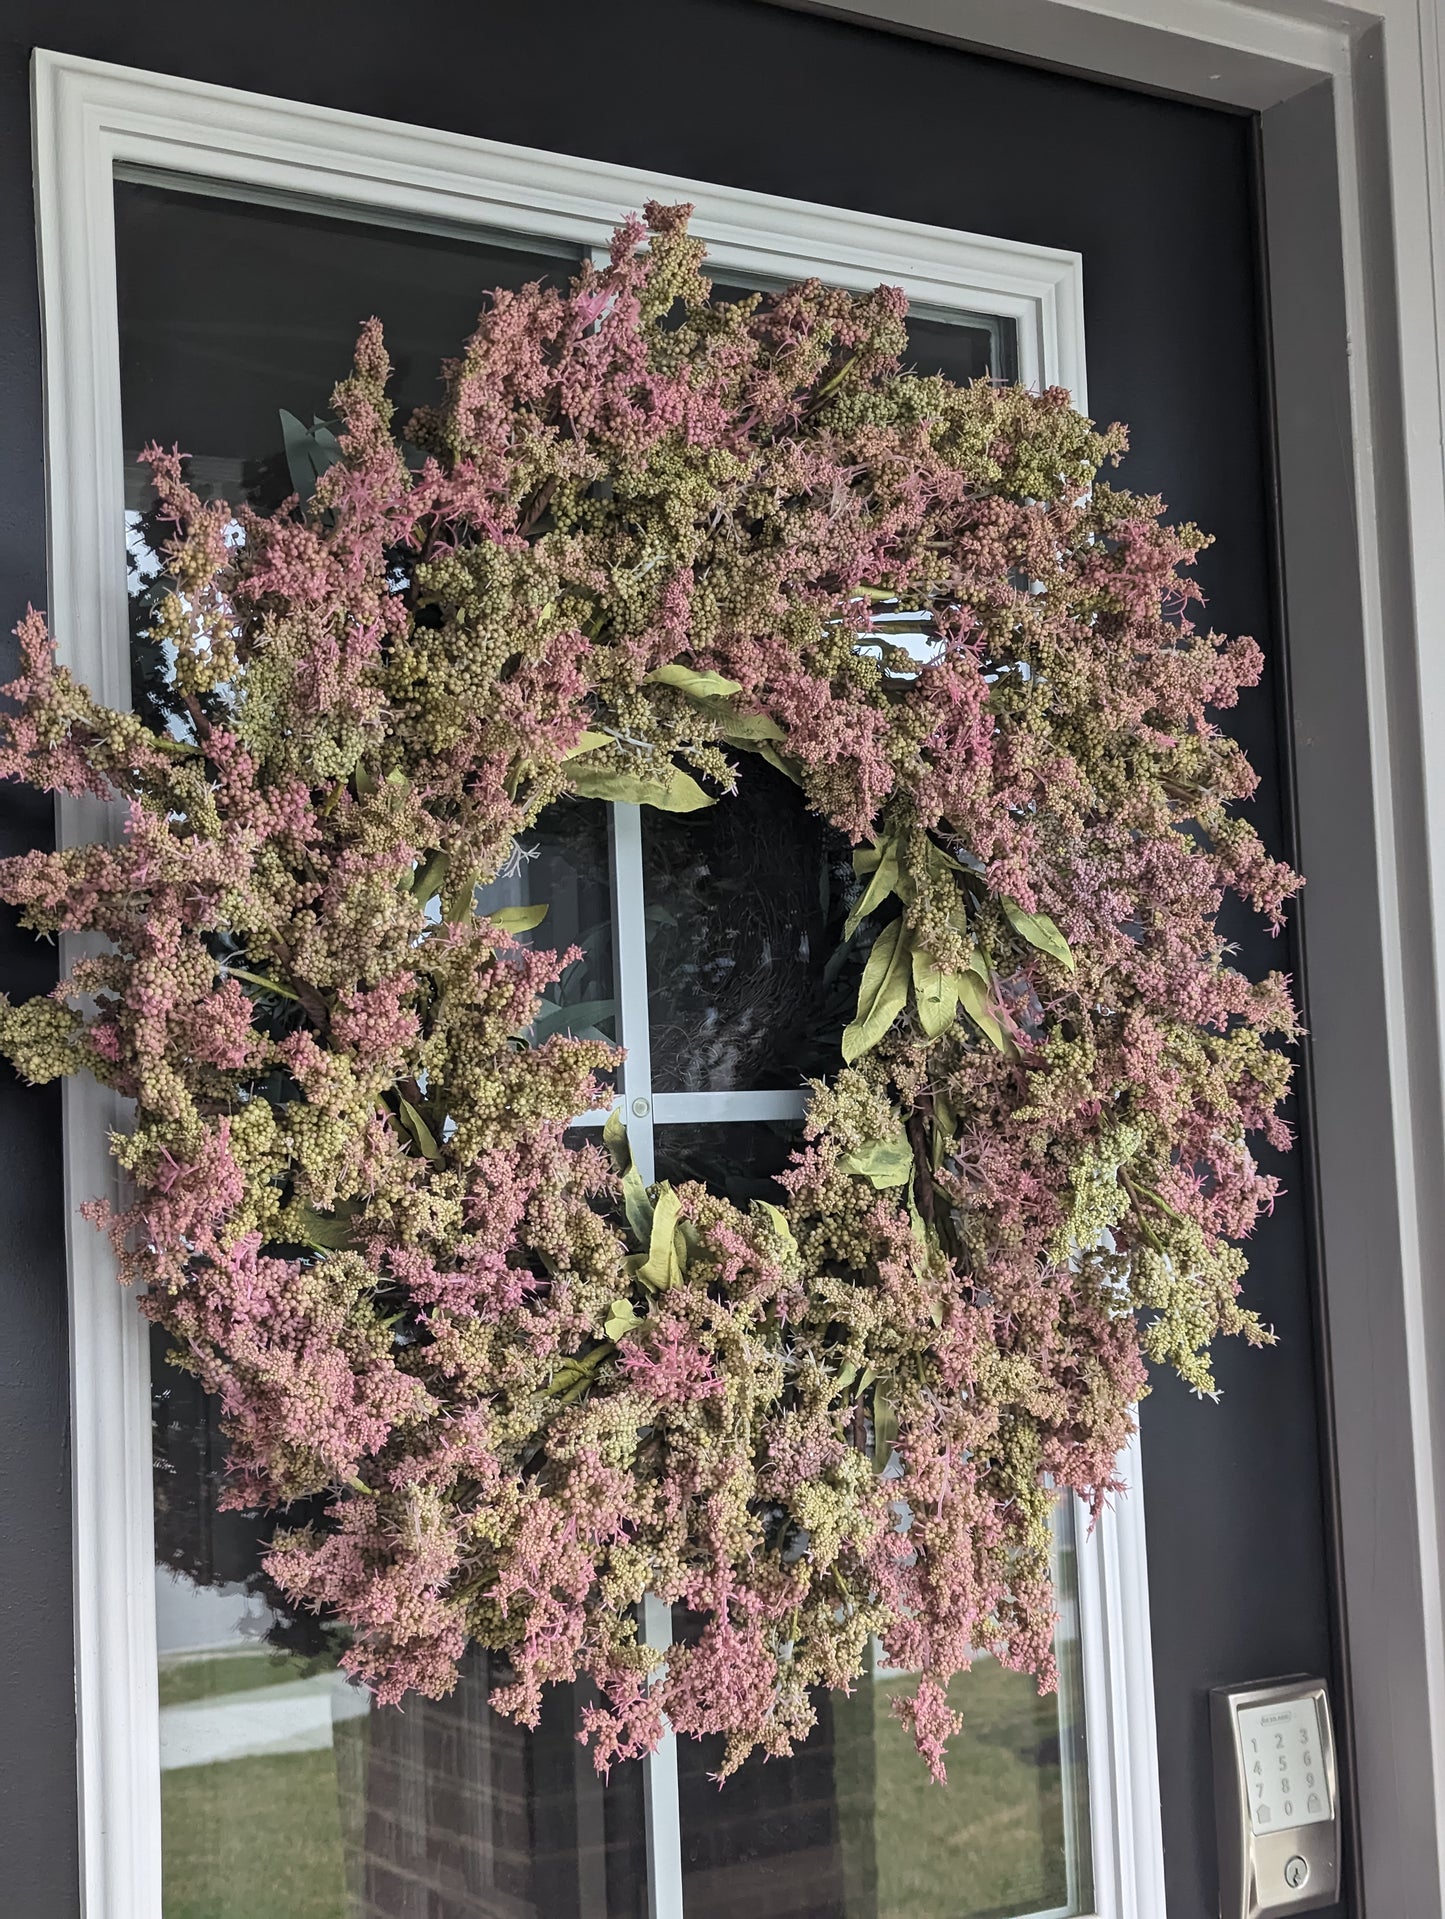 26-inch Artificial Wreath, featuring vibrant green leaves and beautiful clusters of green and pink buds. Perfect for adding a touch of springtime charm to your home, this artificial wreath is designed to look just like the real thing. The wreath's lifelike greenery stands out beautifully against a black door, making it a stylish addition to your home decor.